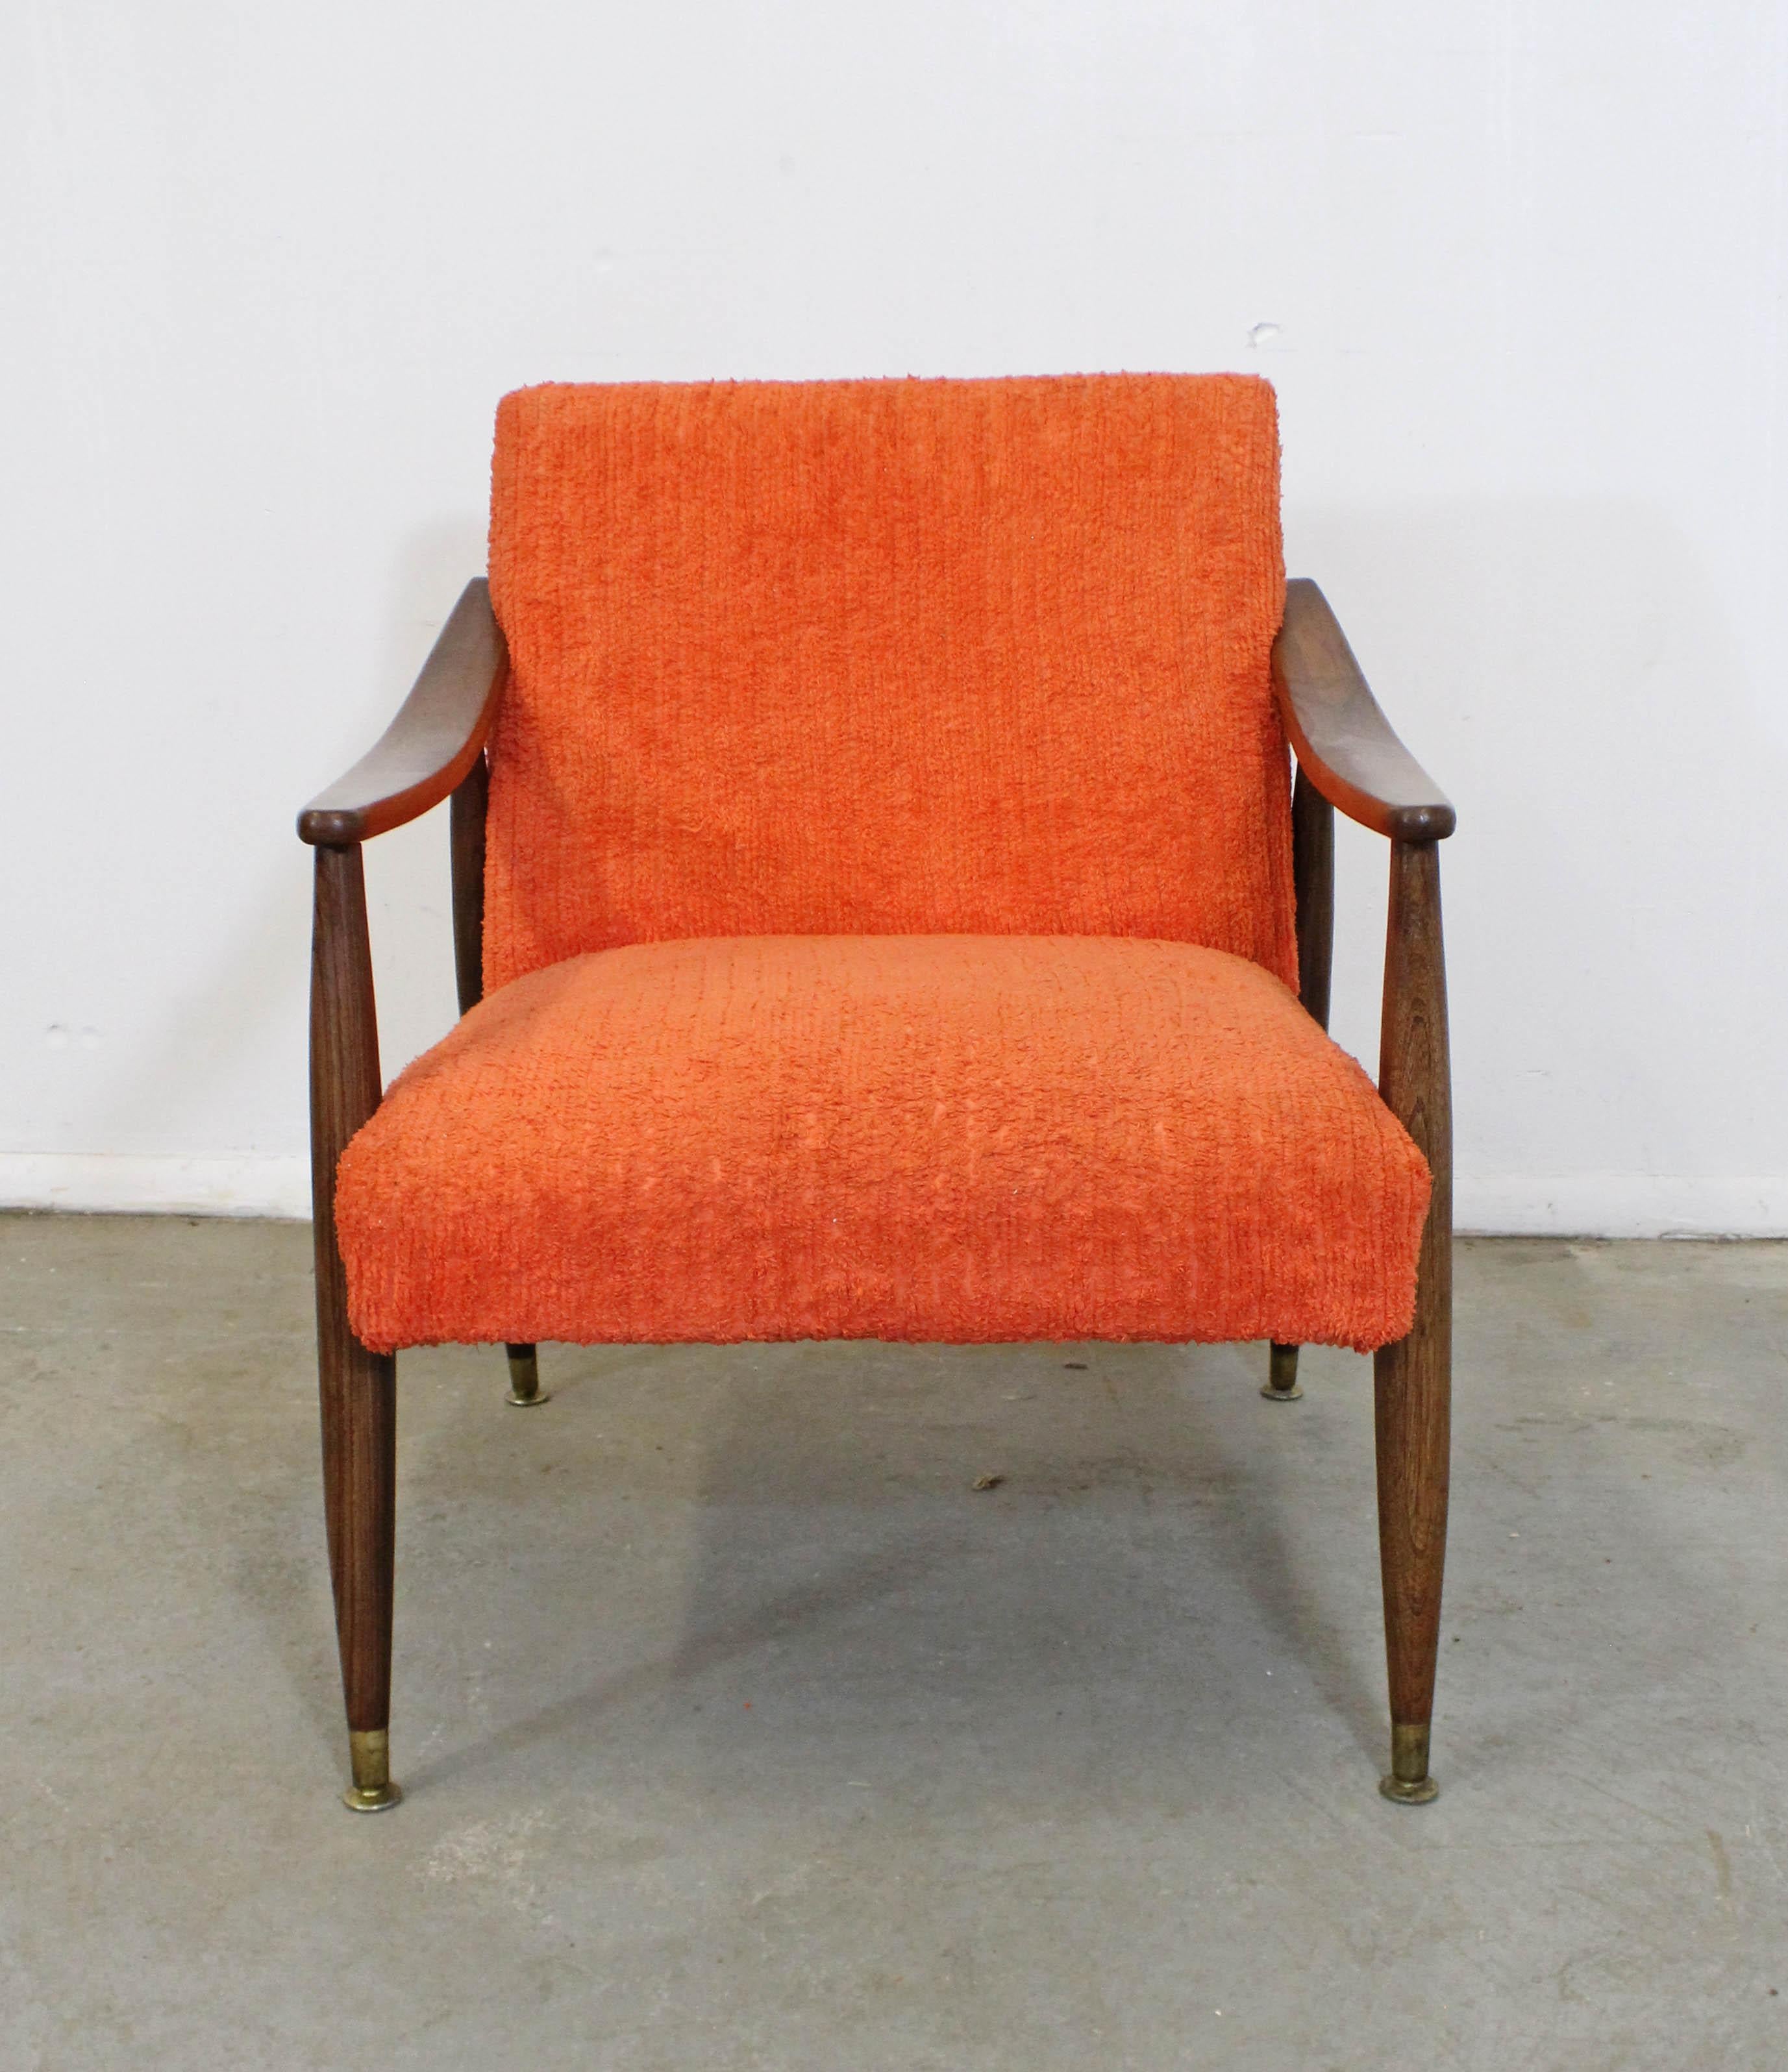 What a find. Offered is a vintage Mid-Century Modern lounge chair made of walnut and textured orange upholstery. This chair has wonderful lines, is in structurally sound condition with a refinished frame. The fabric shows some age wear, but no tears